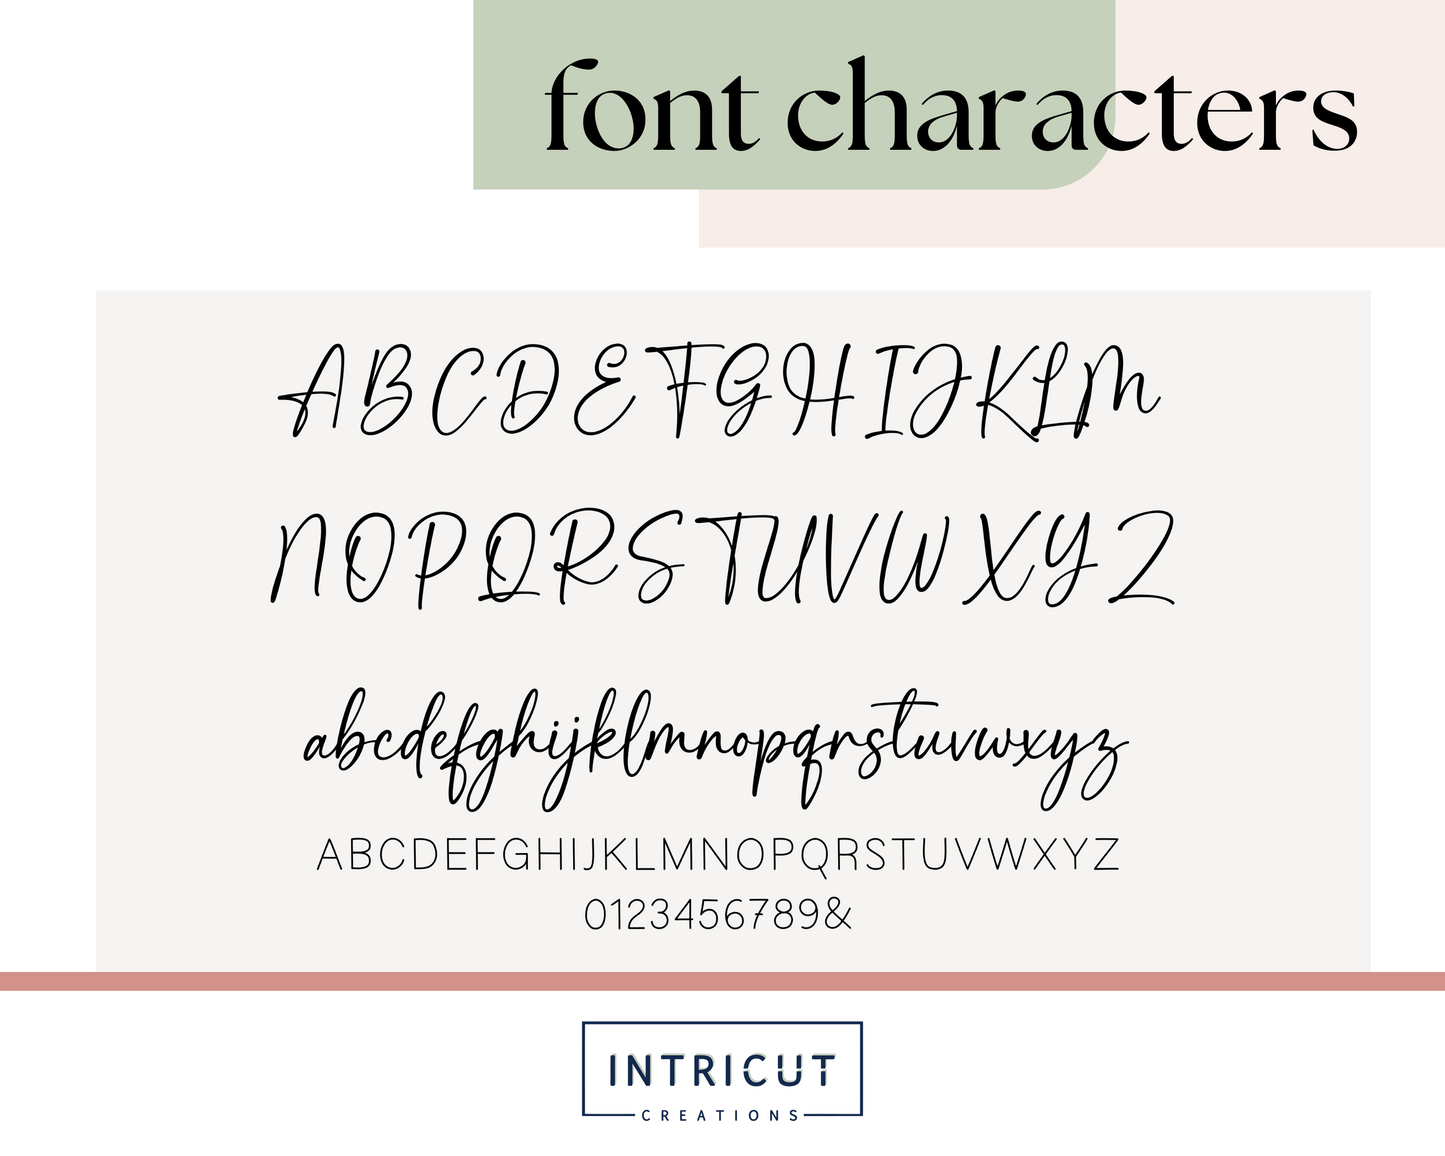 each font character